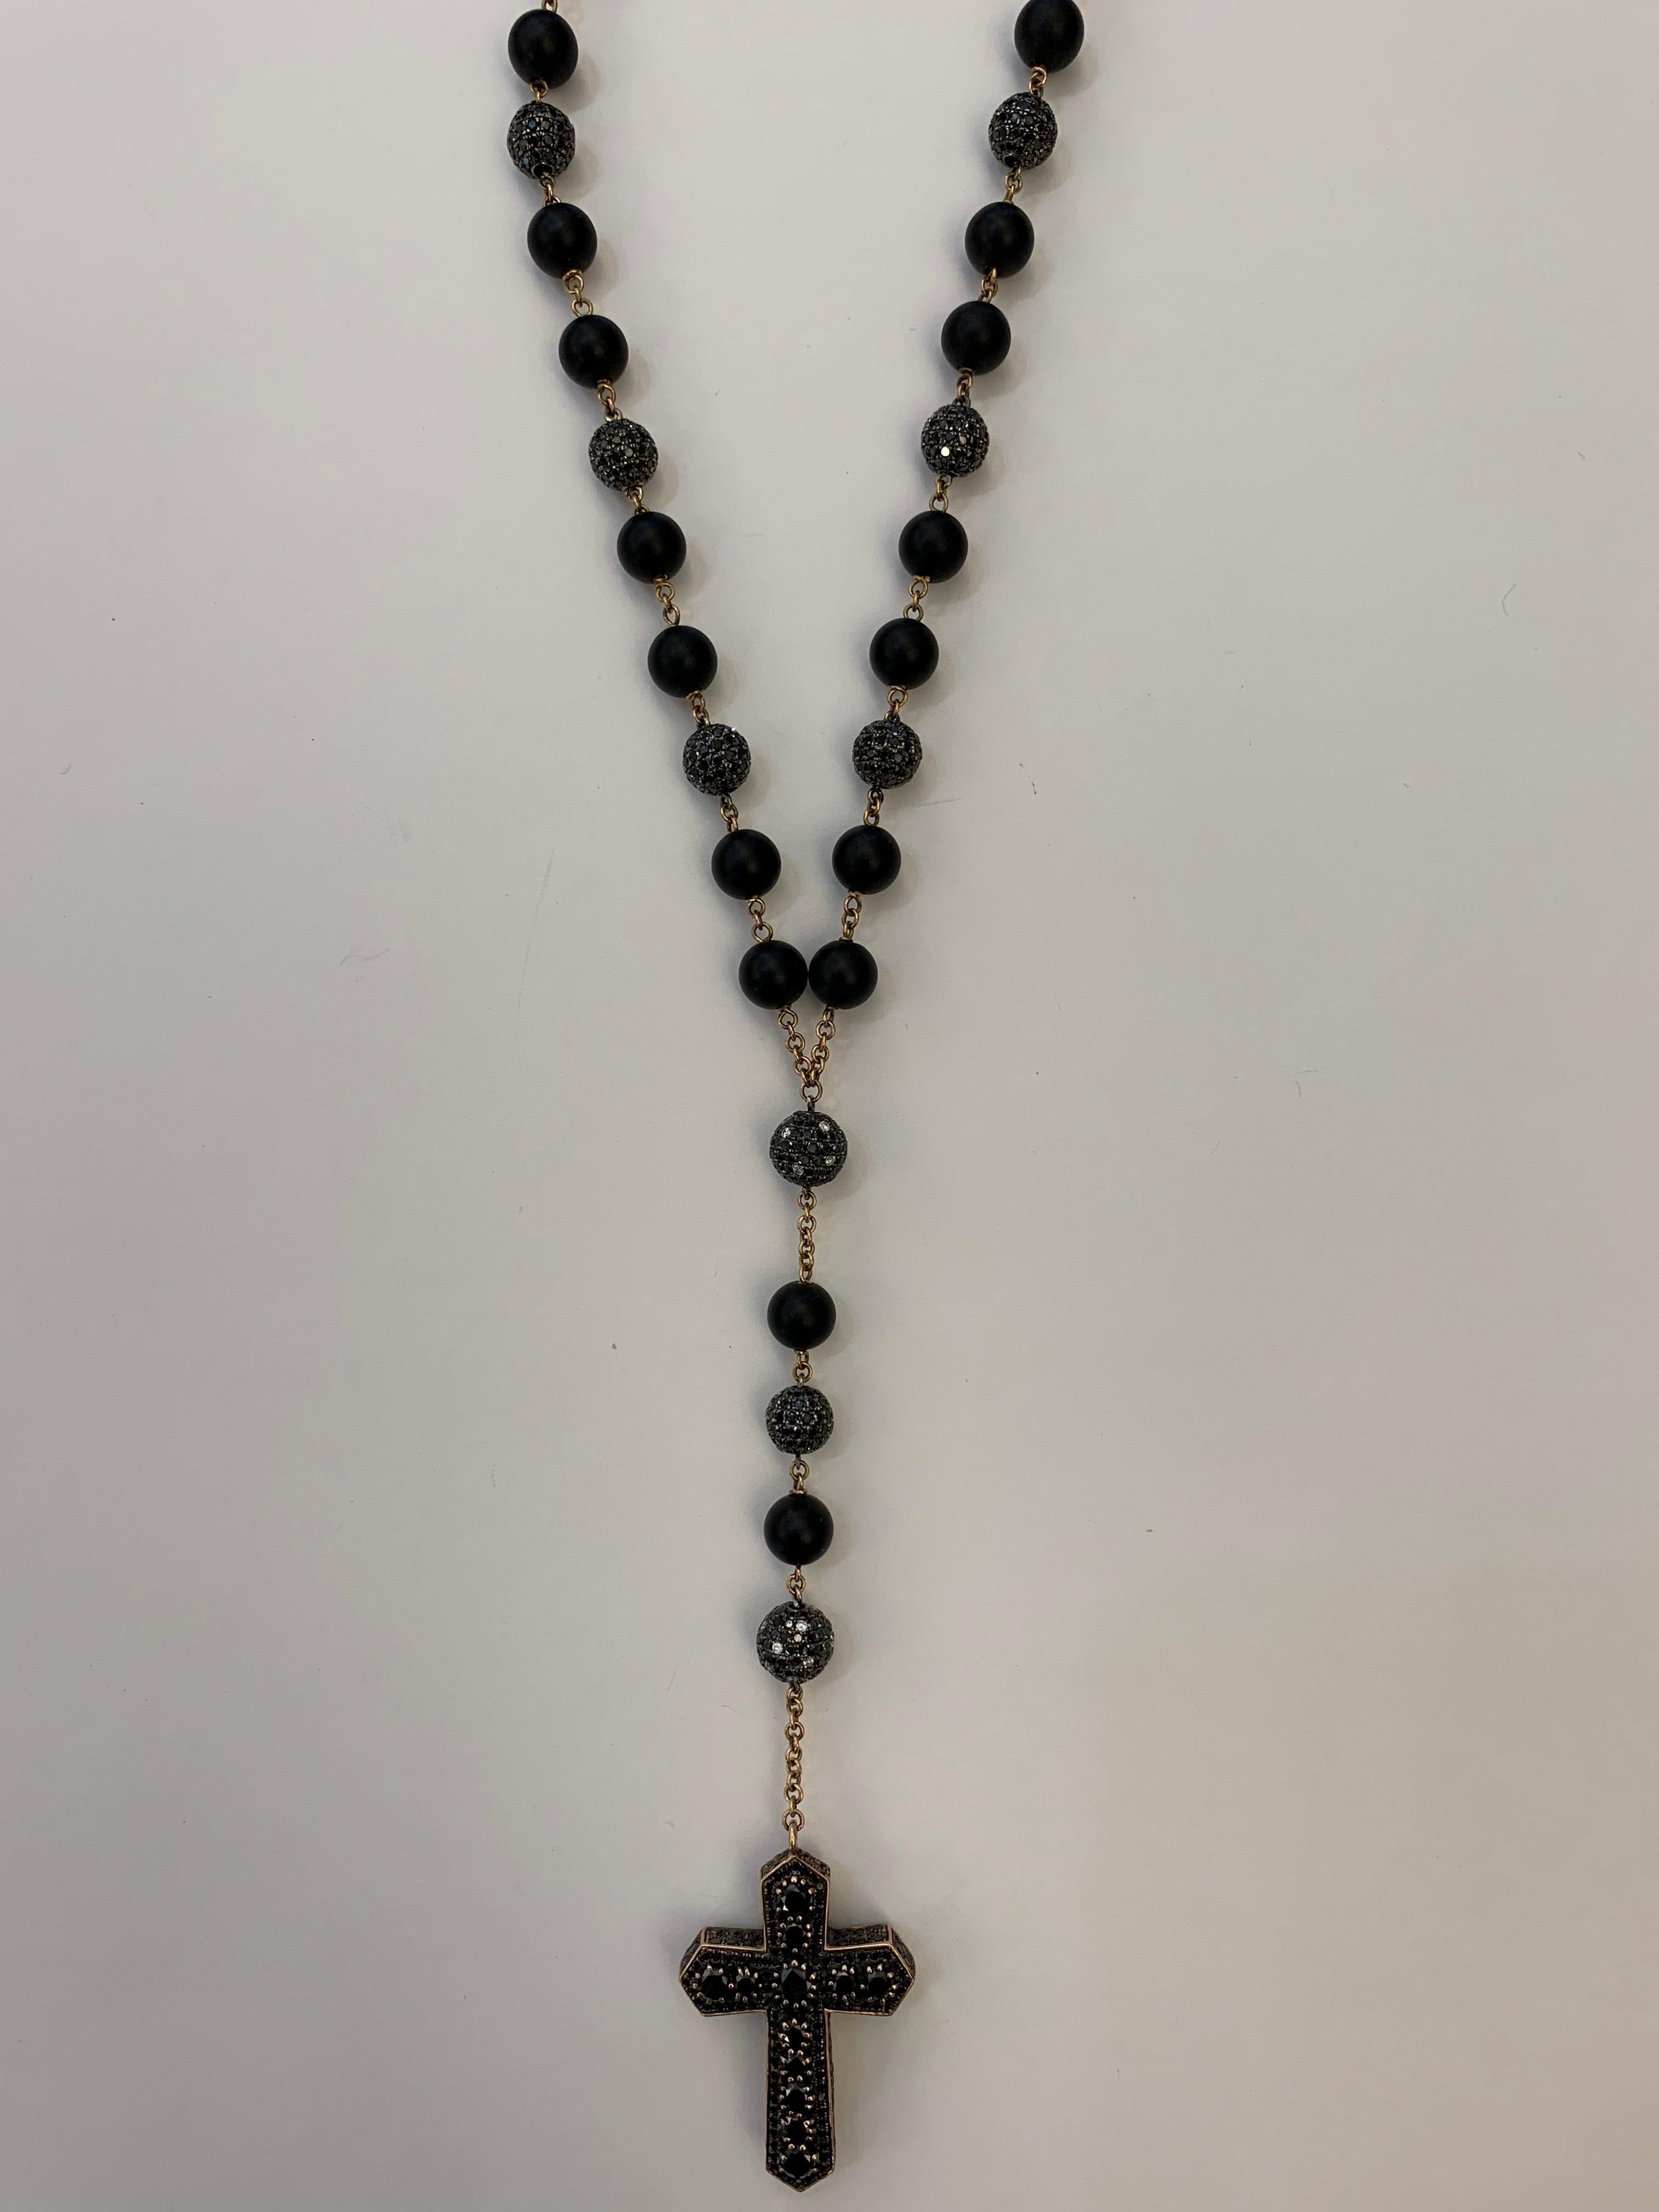 This Long and sleek Rosary Necklace in Black and White Diamond in Gold with Onyx is ideal for hip hop people.

14kt: 36.11g
Diamond: 40.45ct

